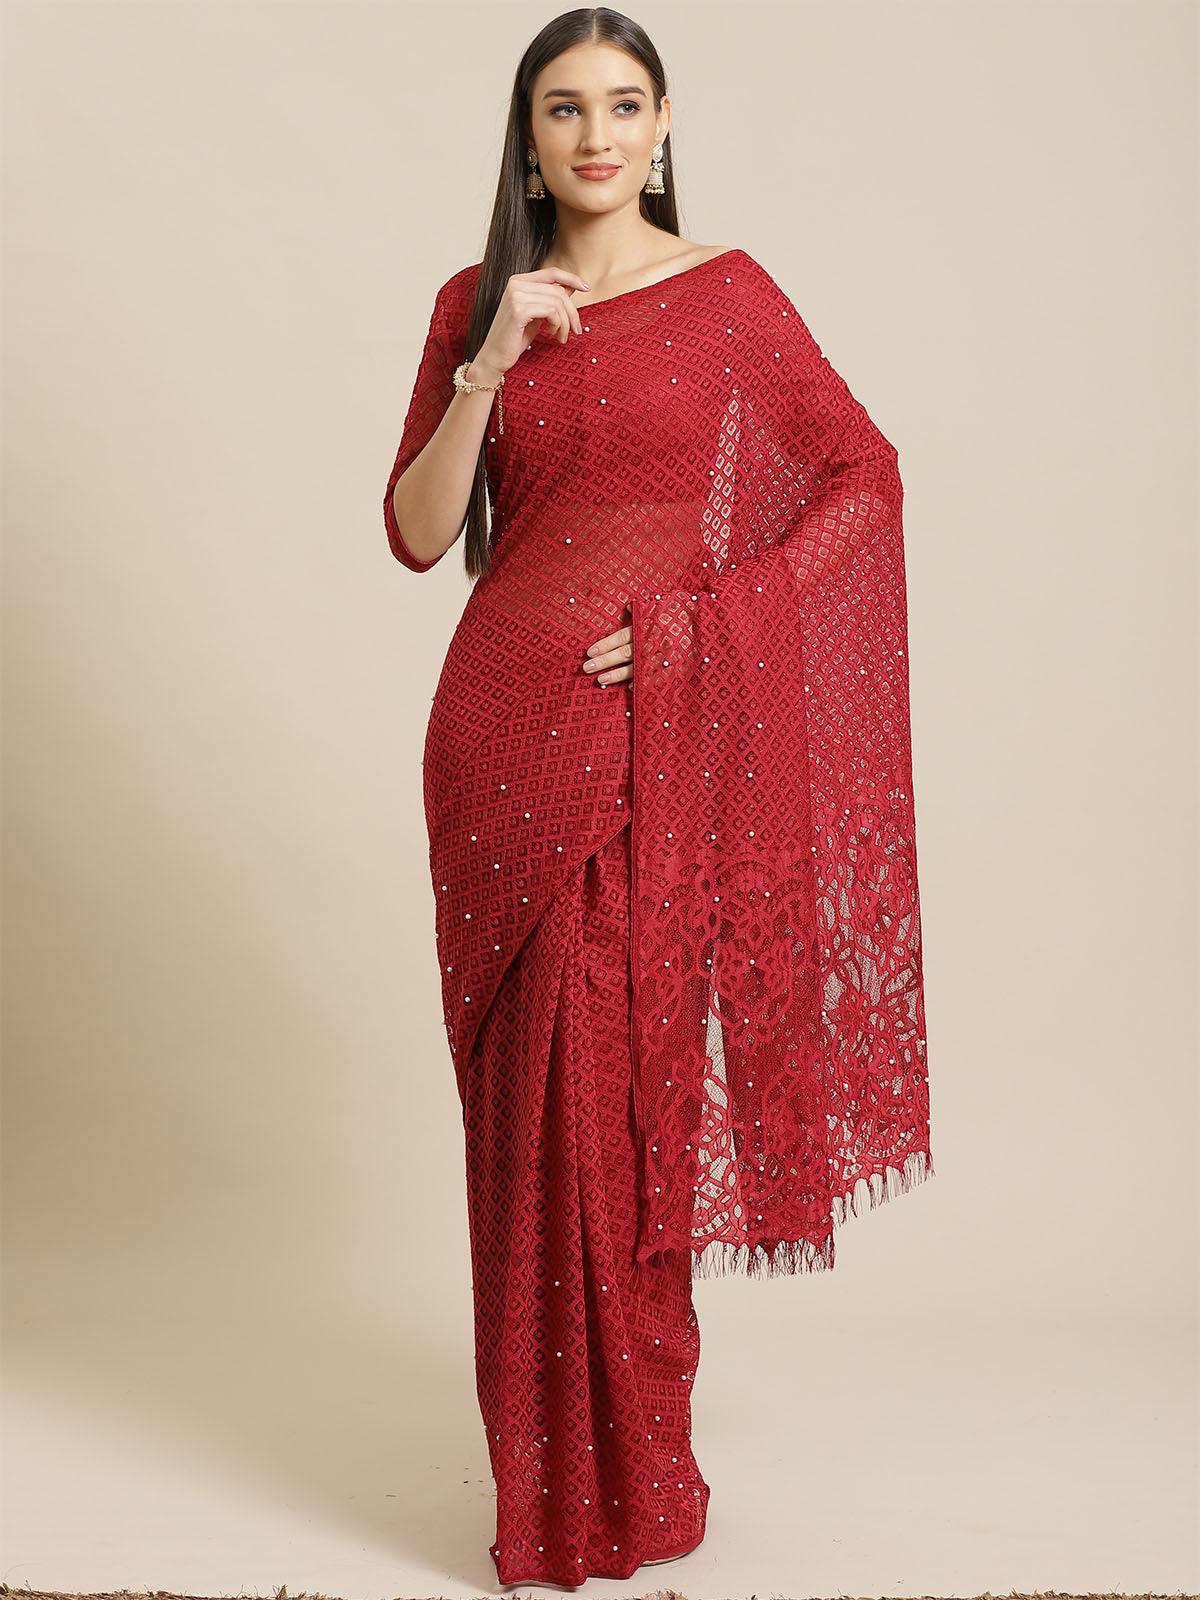 Women's Maroon Party Wear Net(Super Net) Solid Saree With Unstitched Blouse - Odette